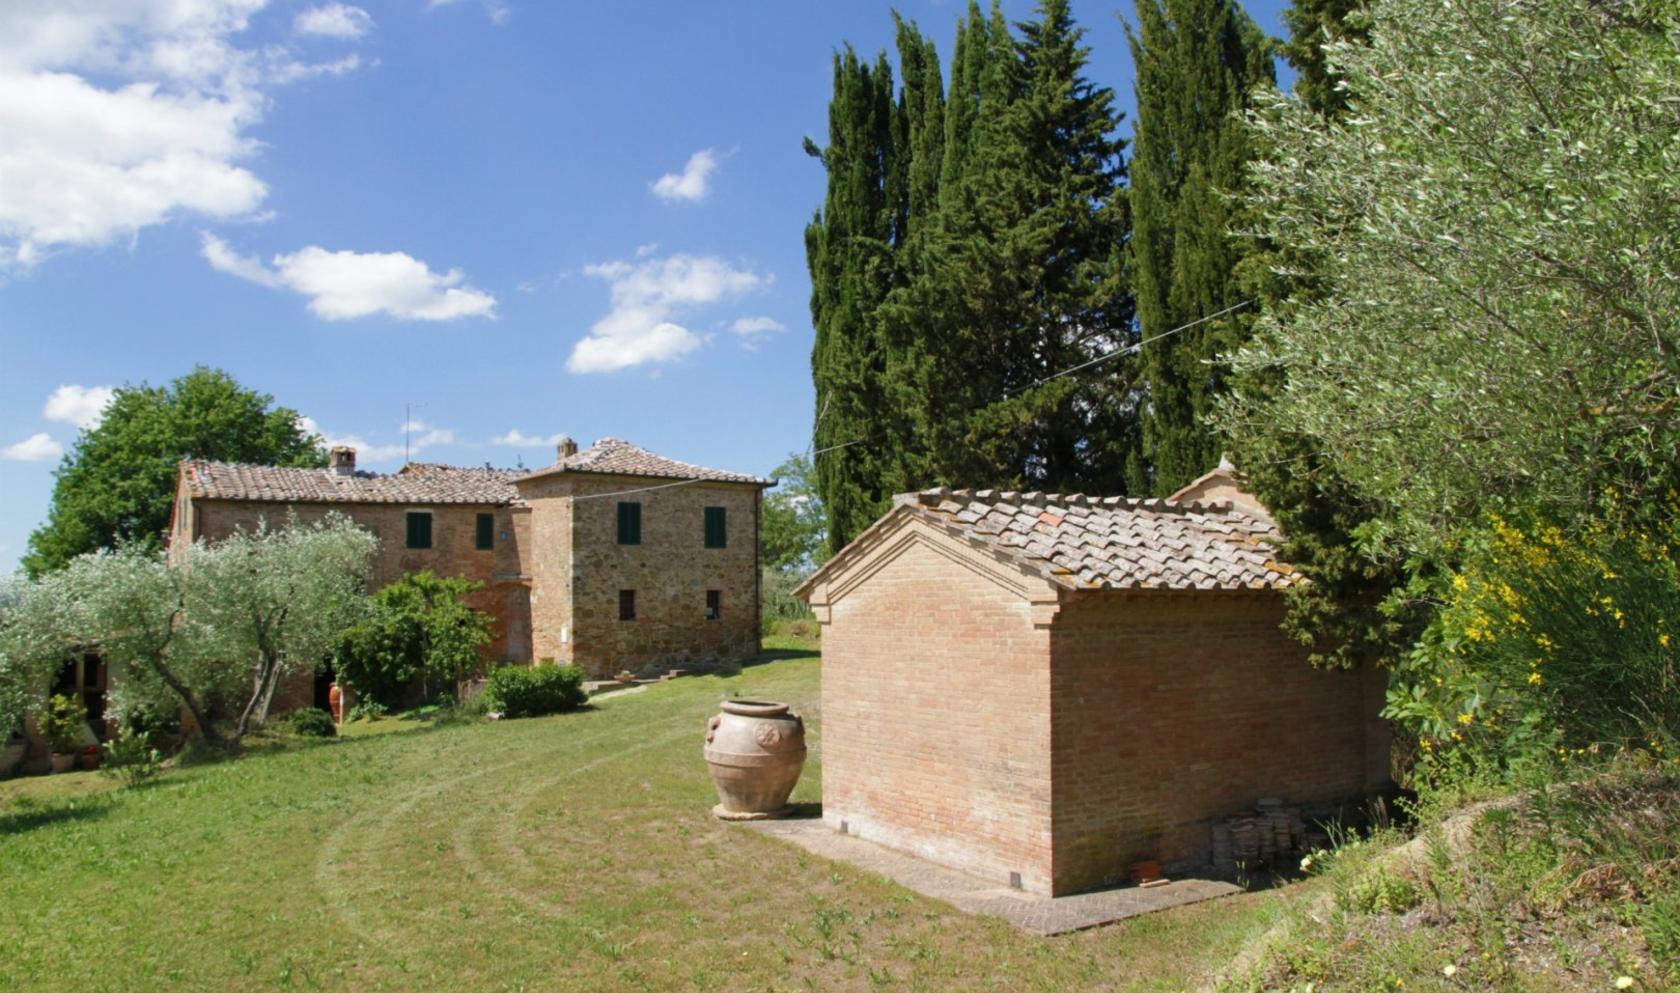 Toscana Immobiliare - Property for sale Tuscany